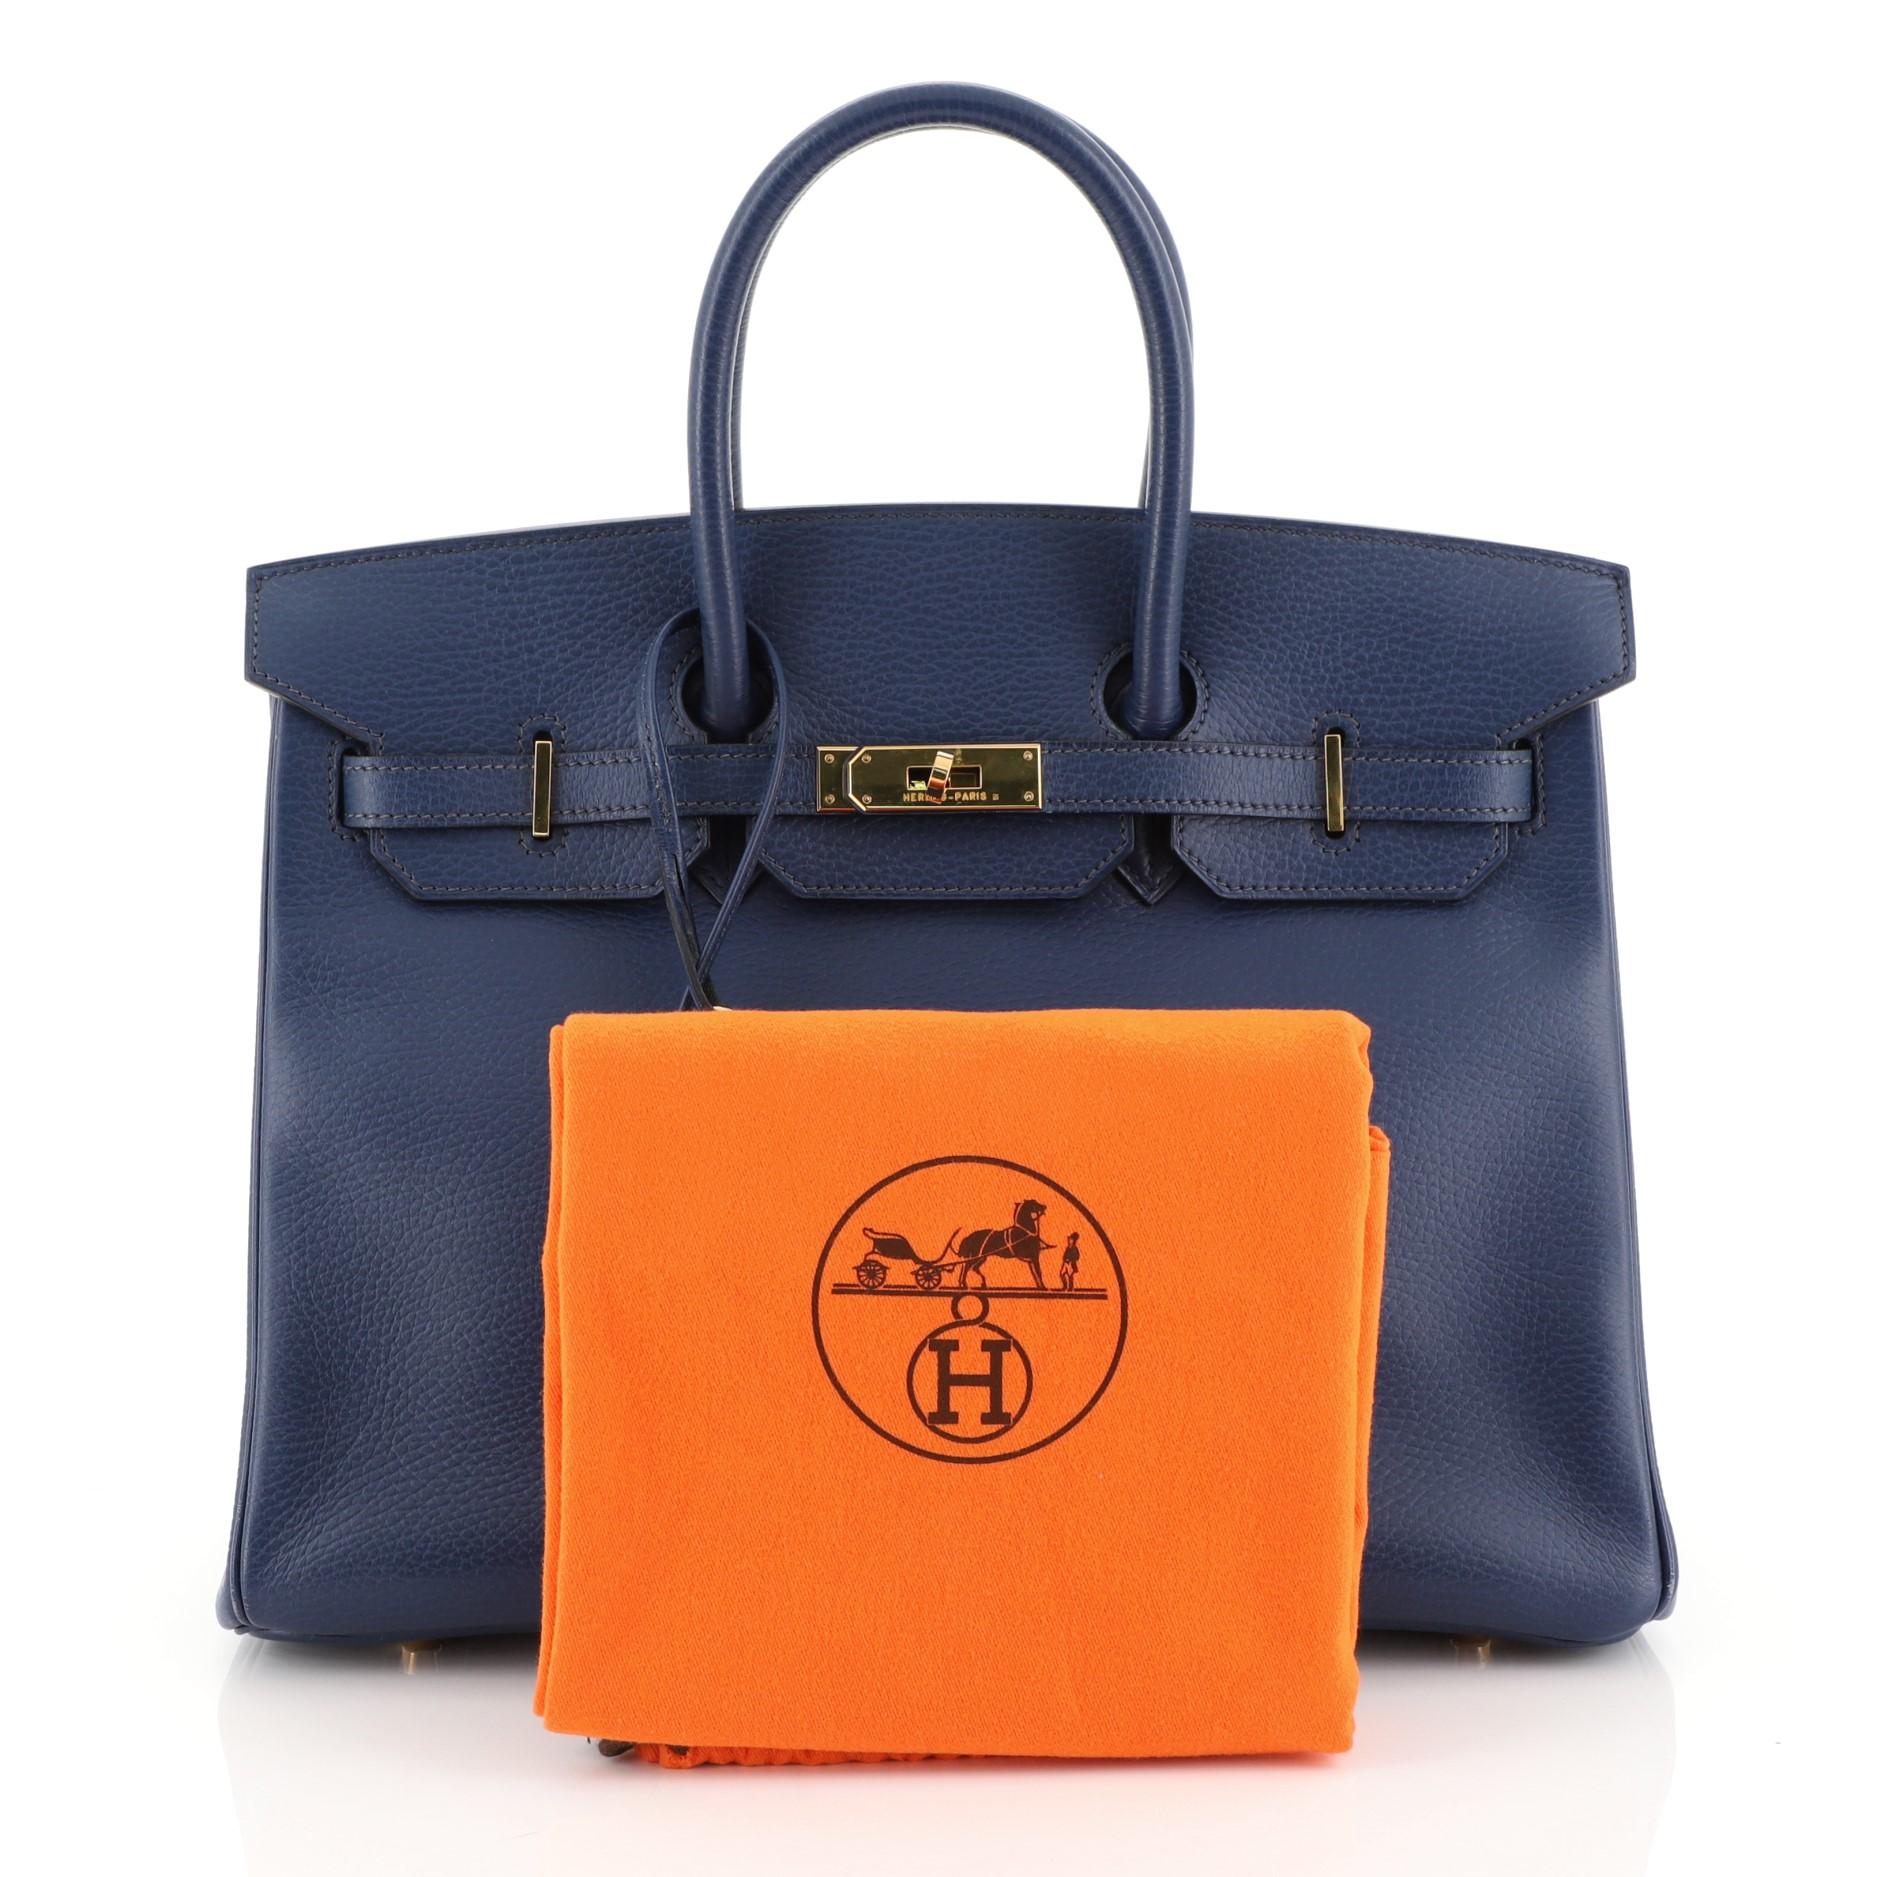 This Hermes Birkin Handbag Bleu Saphir Ardennes with Gold Hardware 35, crafted in Bleu Saphir blue Ardennes leather, features dual rolled handles, frontal flap, and gold hardware. Its turn-lock closure opens to a Bleu Saphir blue Chevre leather